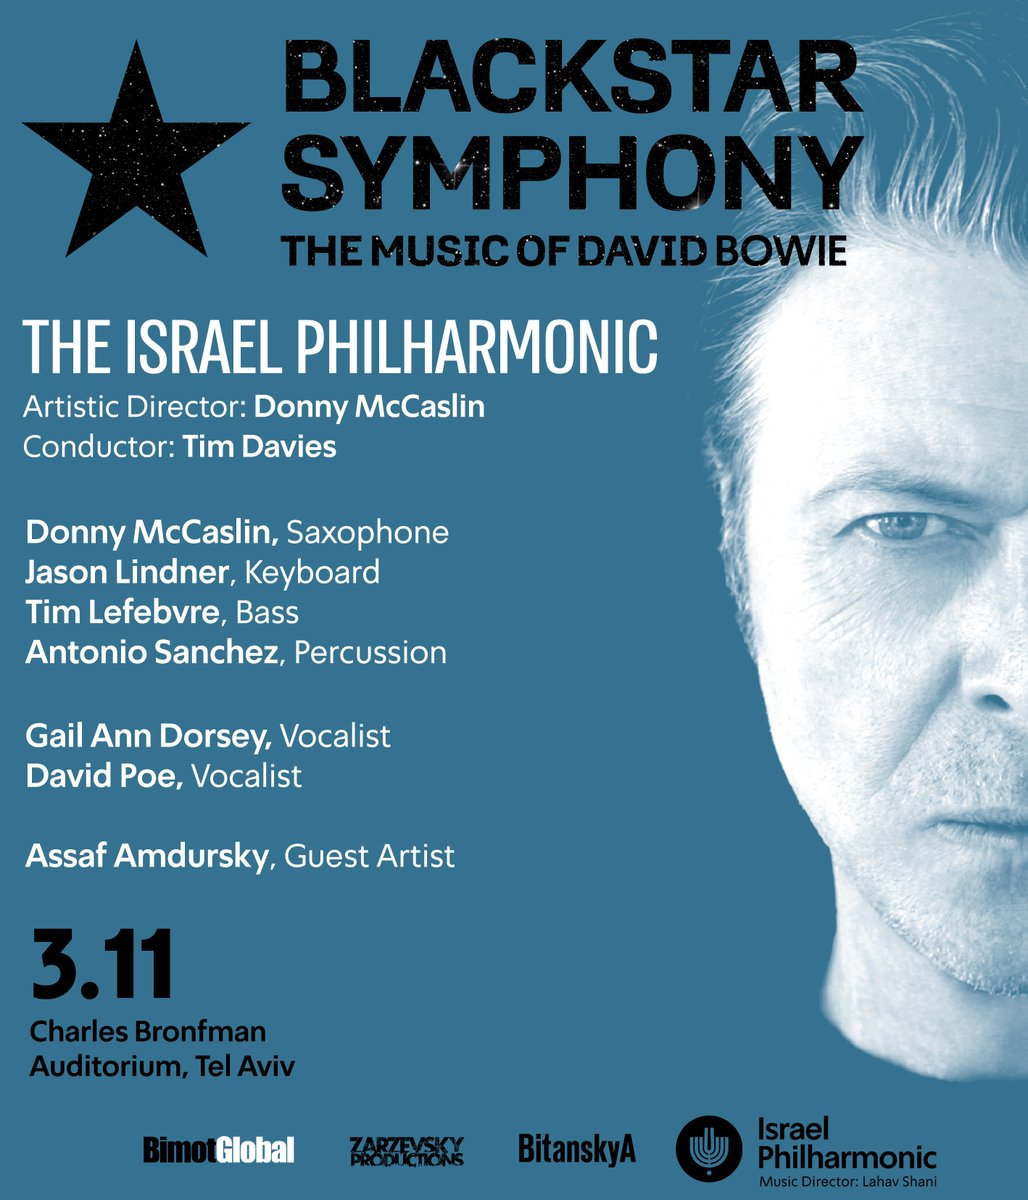 I’m thrilled to collaborate with @Israel_Phil on Blackstar Symphony. I’ll be performing in a quartet with @flymyspcshp, Tim Lefebvre, and @AntonioDrumsX along with vocalists @Gail_Ann_Dorsey, @DavidPoeMusic, and special guest Assaf Amdursky.